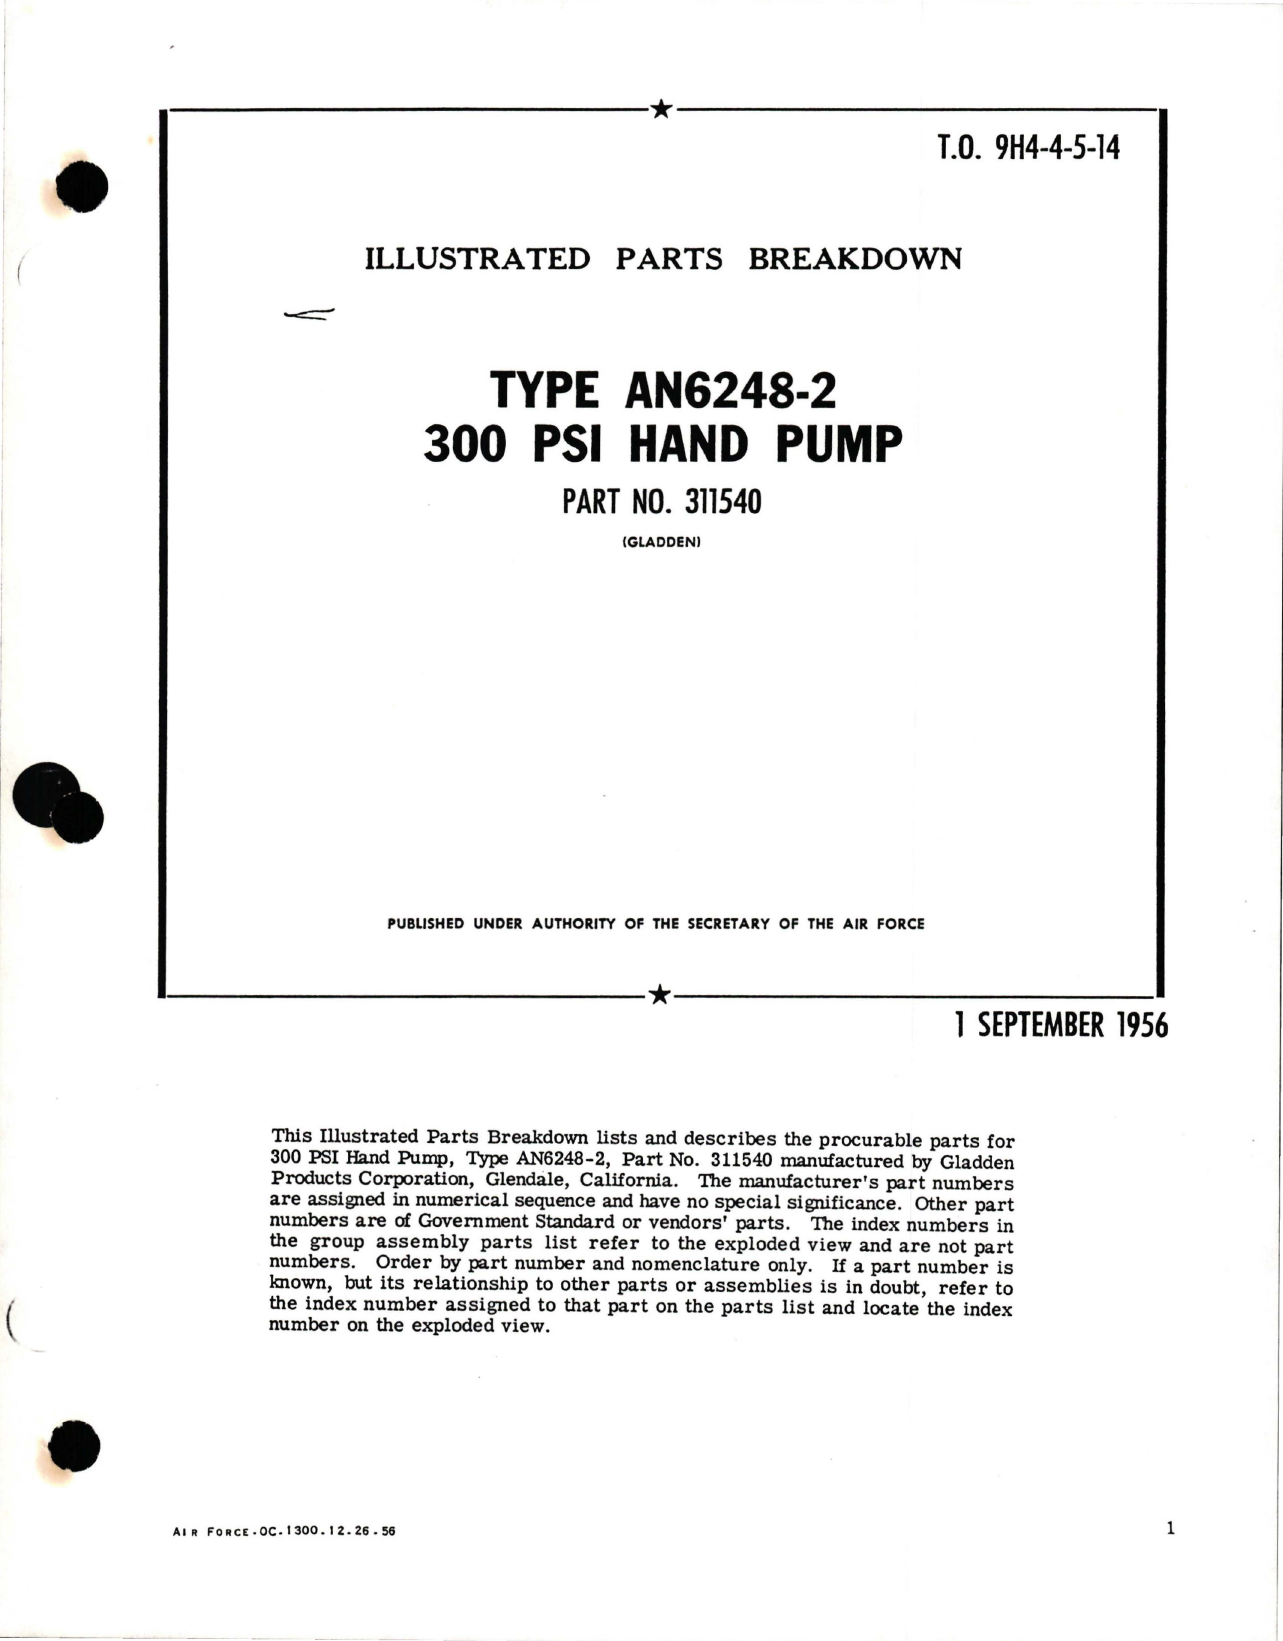 Sample page 1 from AirCorps Library document: Illustrated Parts Breakdown for Hand Pump - 3000 PSI  - Type AN6248-2 - Part 311540